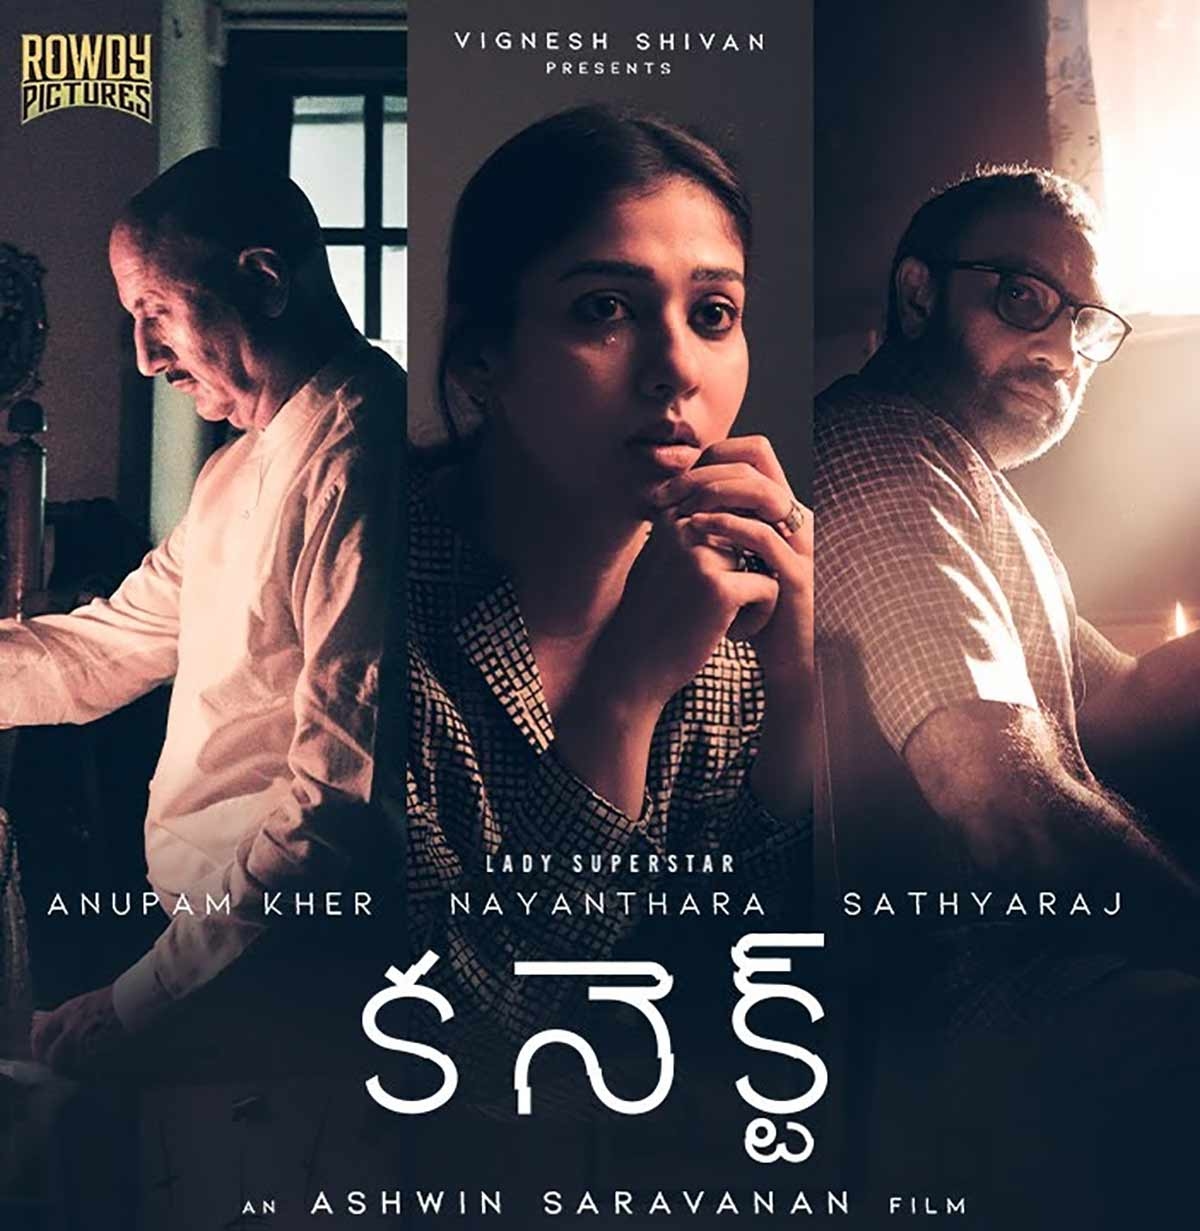 Connect Telugu Movie Review